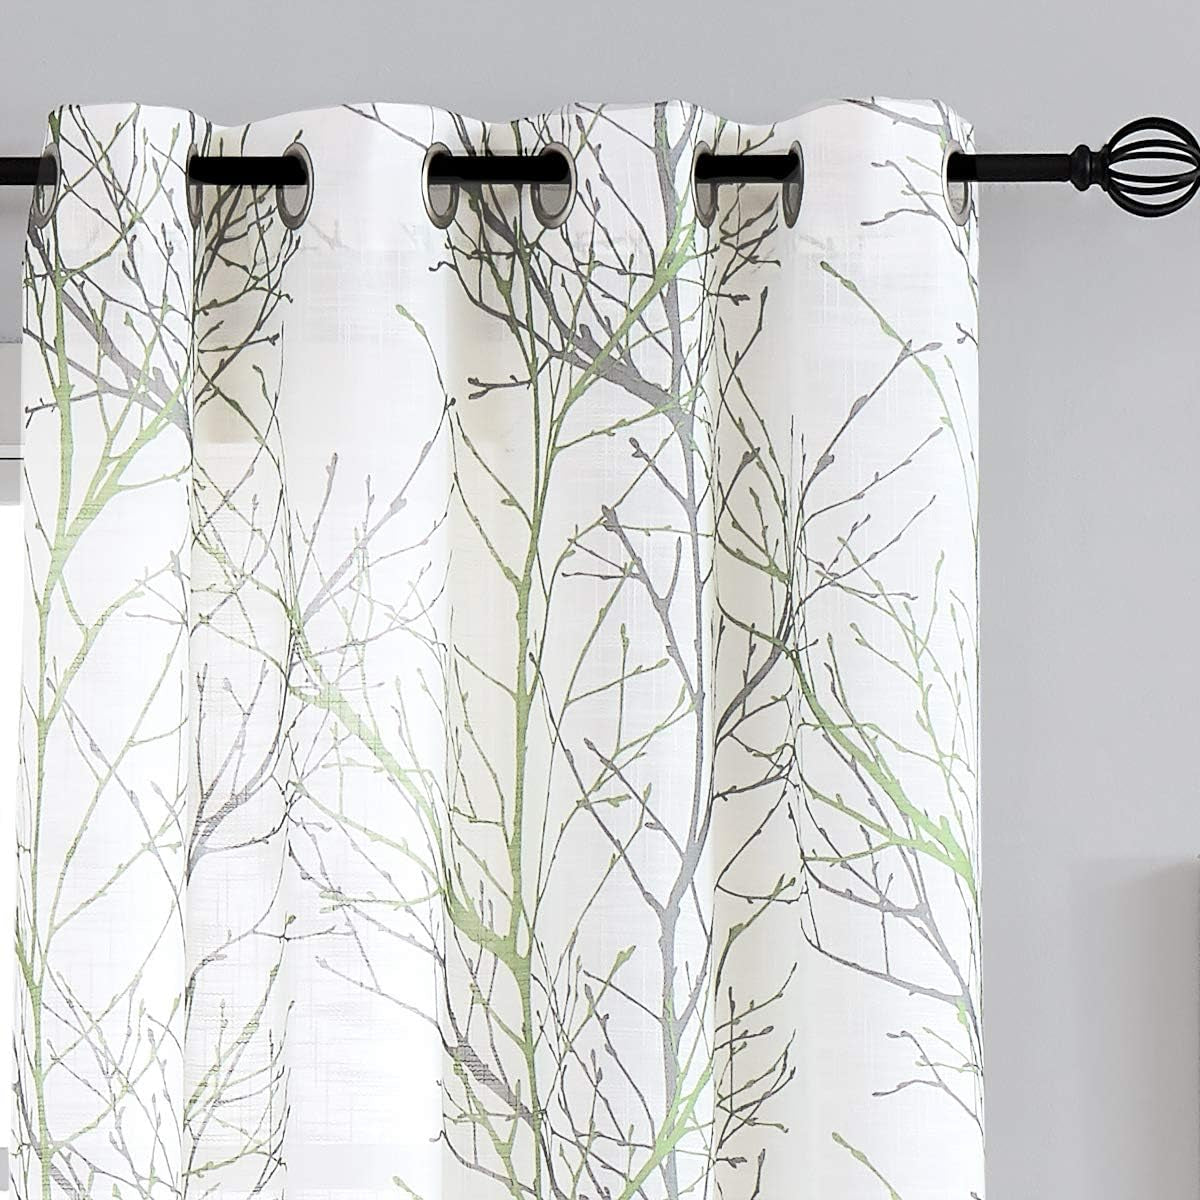 FMFUNCTEX Blue White Curtains for Kitchen Living Room 72“ Grey Tree Branches Print Curtain Set for Small Windows Linen Textured Semi-Sheer Drapes for Bedroom Grommet Top, 2 Panels  Fmfunctex Green 50" X 45" |2Pcs 